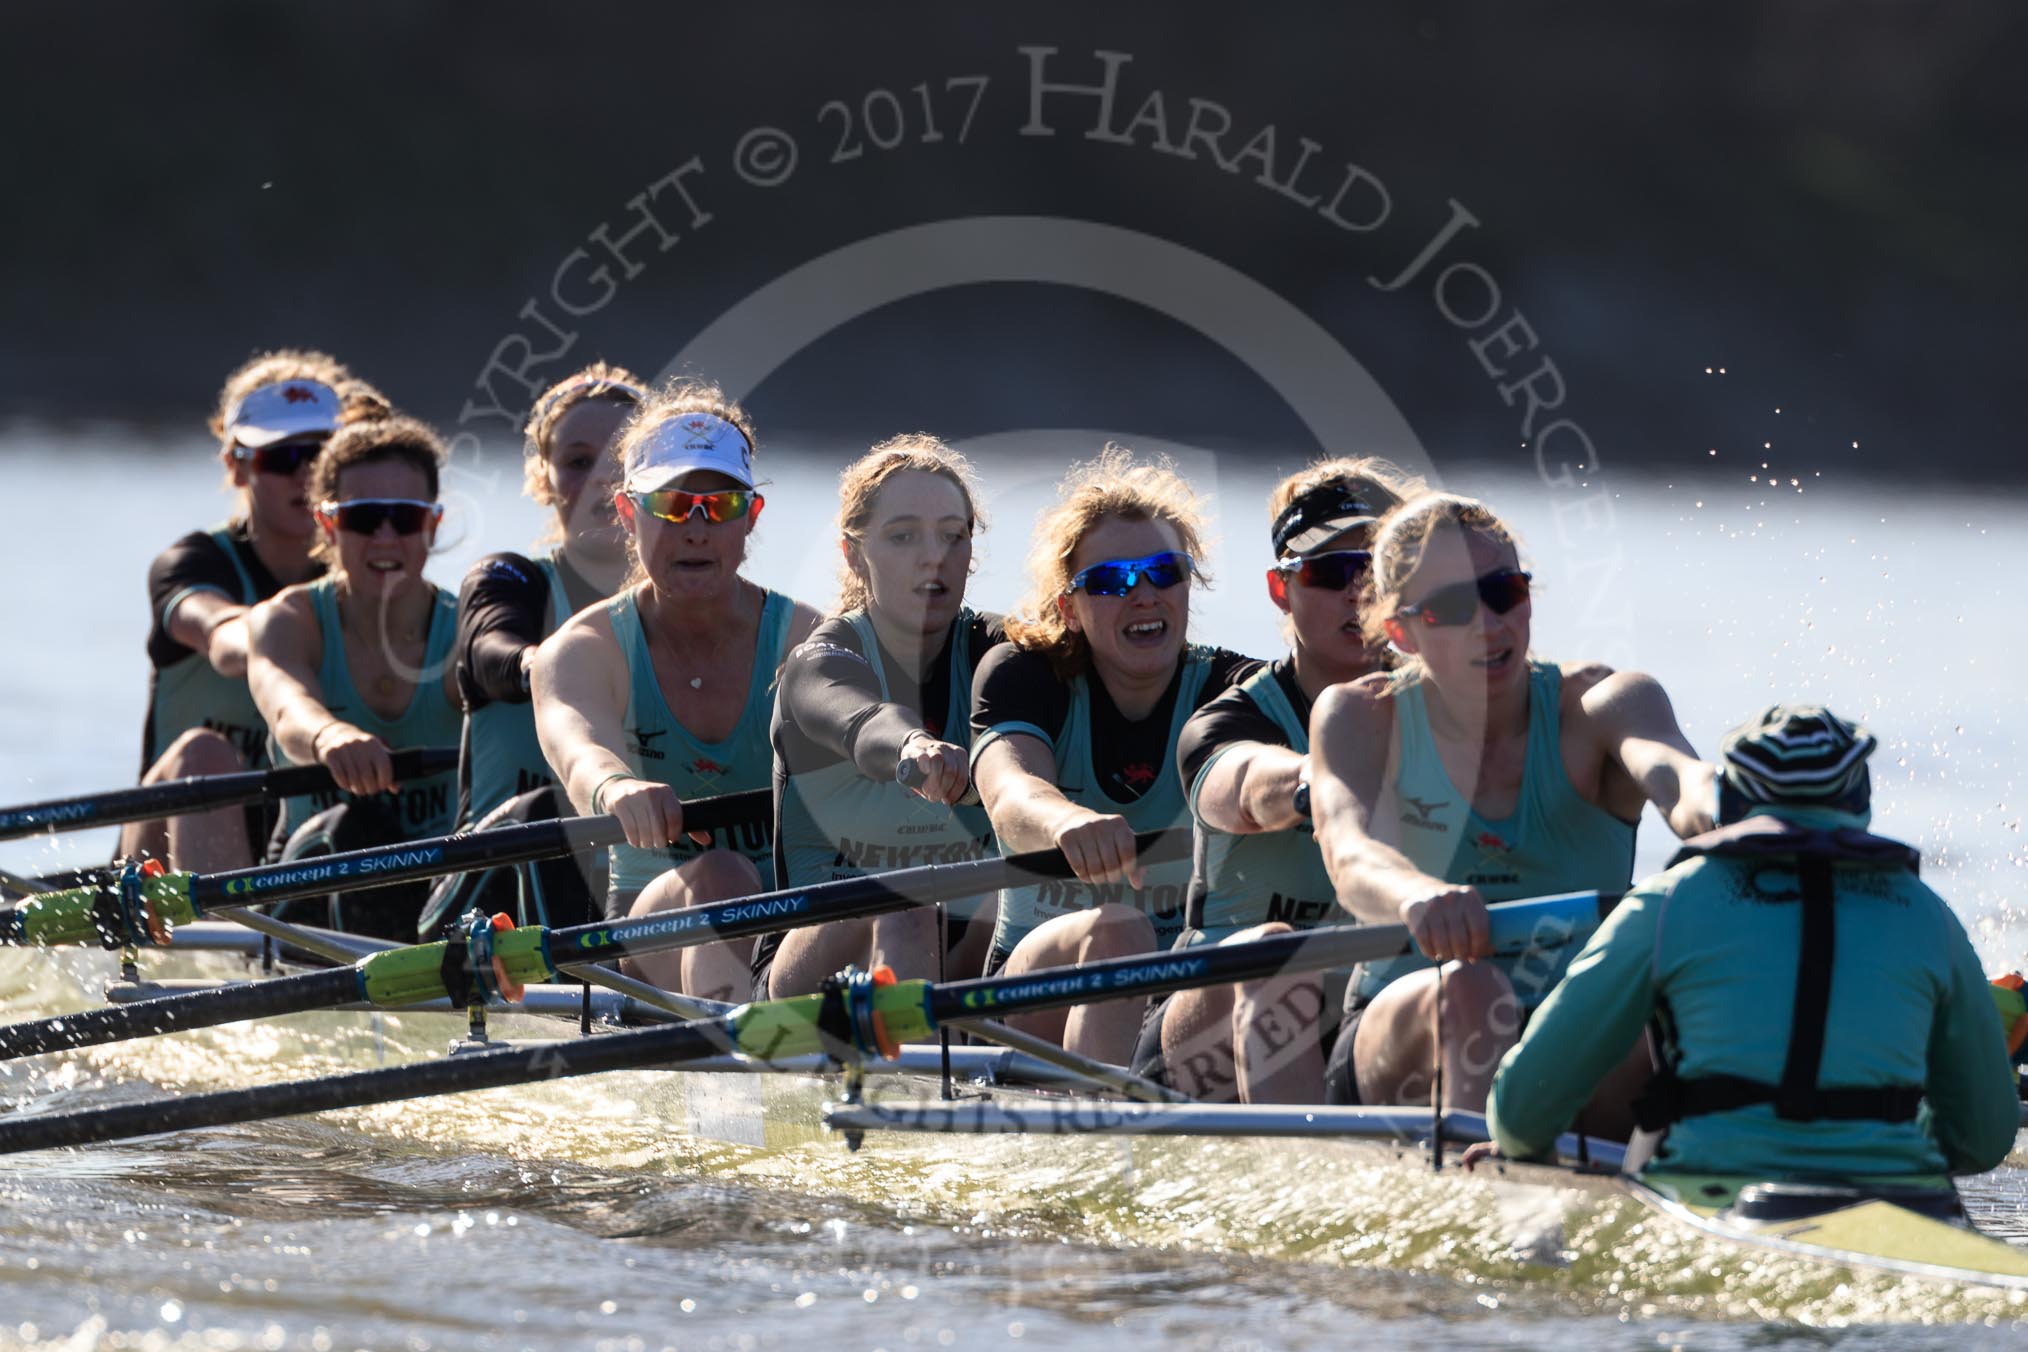 The Women's Boat Race season 2018 - fixture CUWBC vs. ULBC: The CUWBC Eight - here bow Ally French, 2 Robyn Hart-Winks, 3 Fionnuala Gannon, 4 Katherine Barnhill, 5 Hannah Roberts, 6 Oonagh Cousins, 7 Imogen Grant, stroke Tricia Smith, cox Sophie Shapter.
River Thames between Putney Bridge and Mortlake,
London SW15,

United Kingdom,
on 17 February 2018 at 13:31, image #144